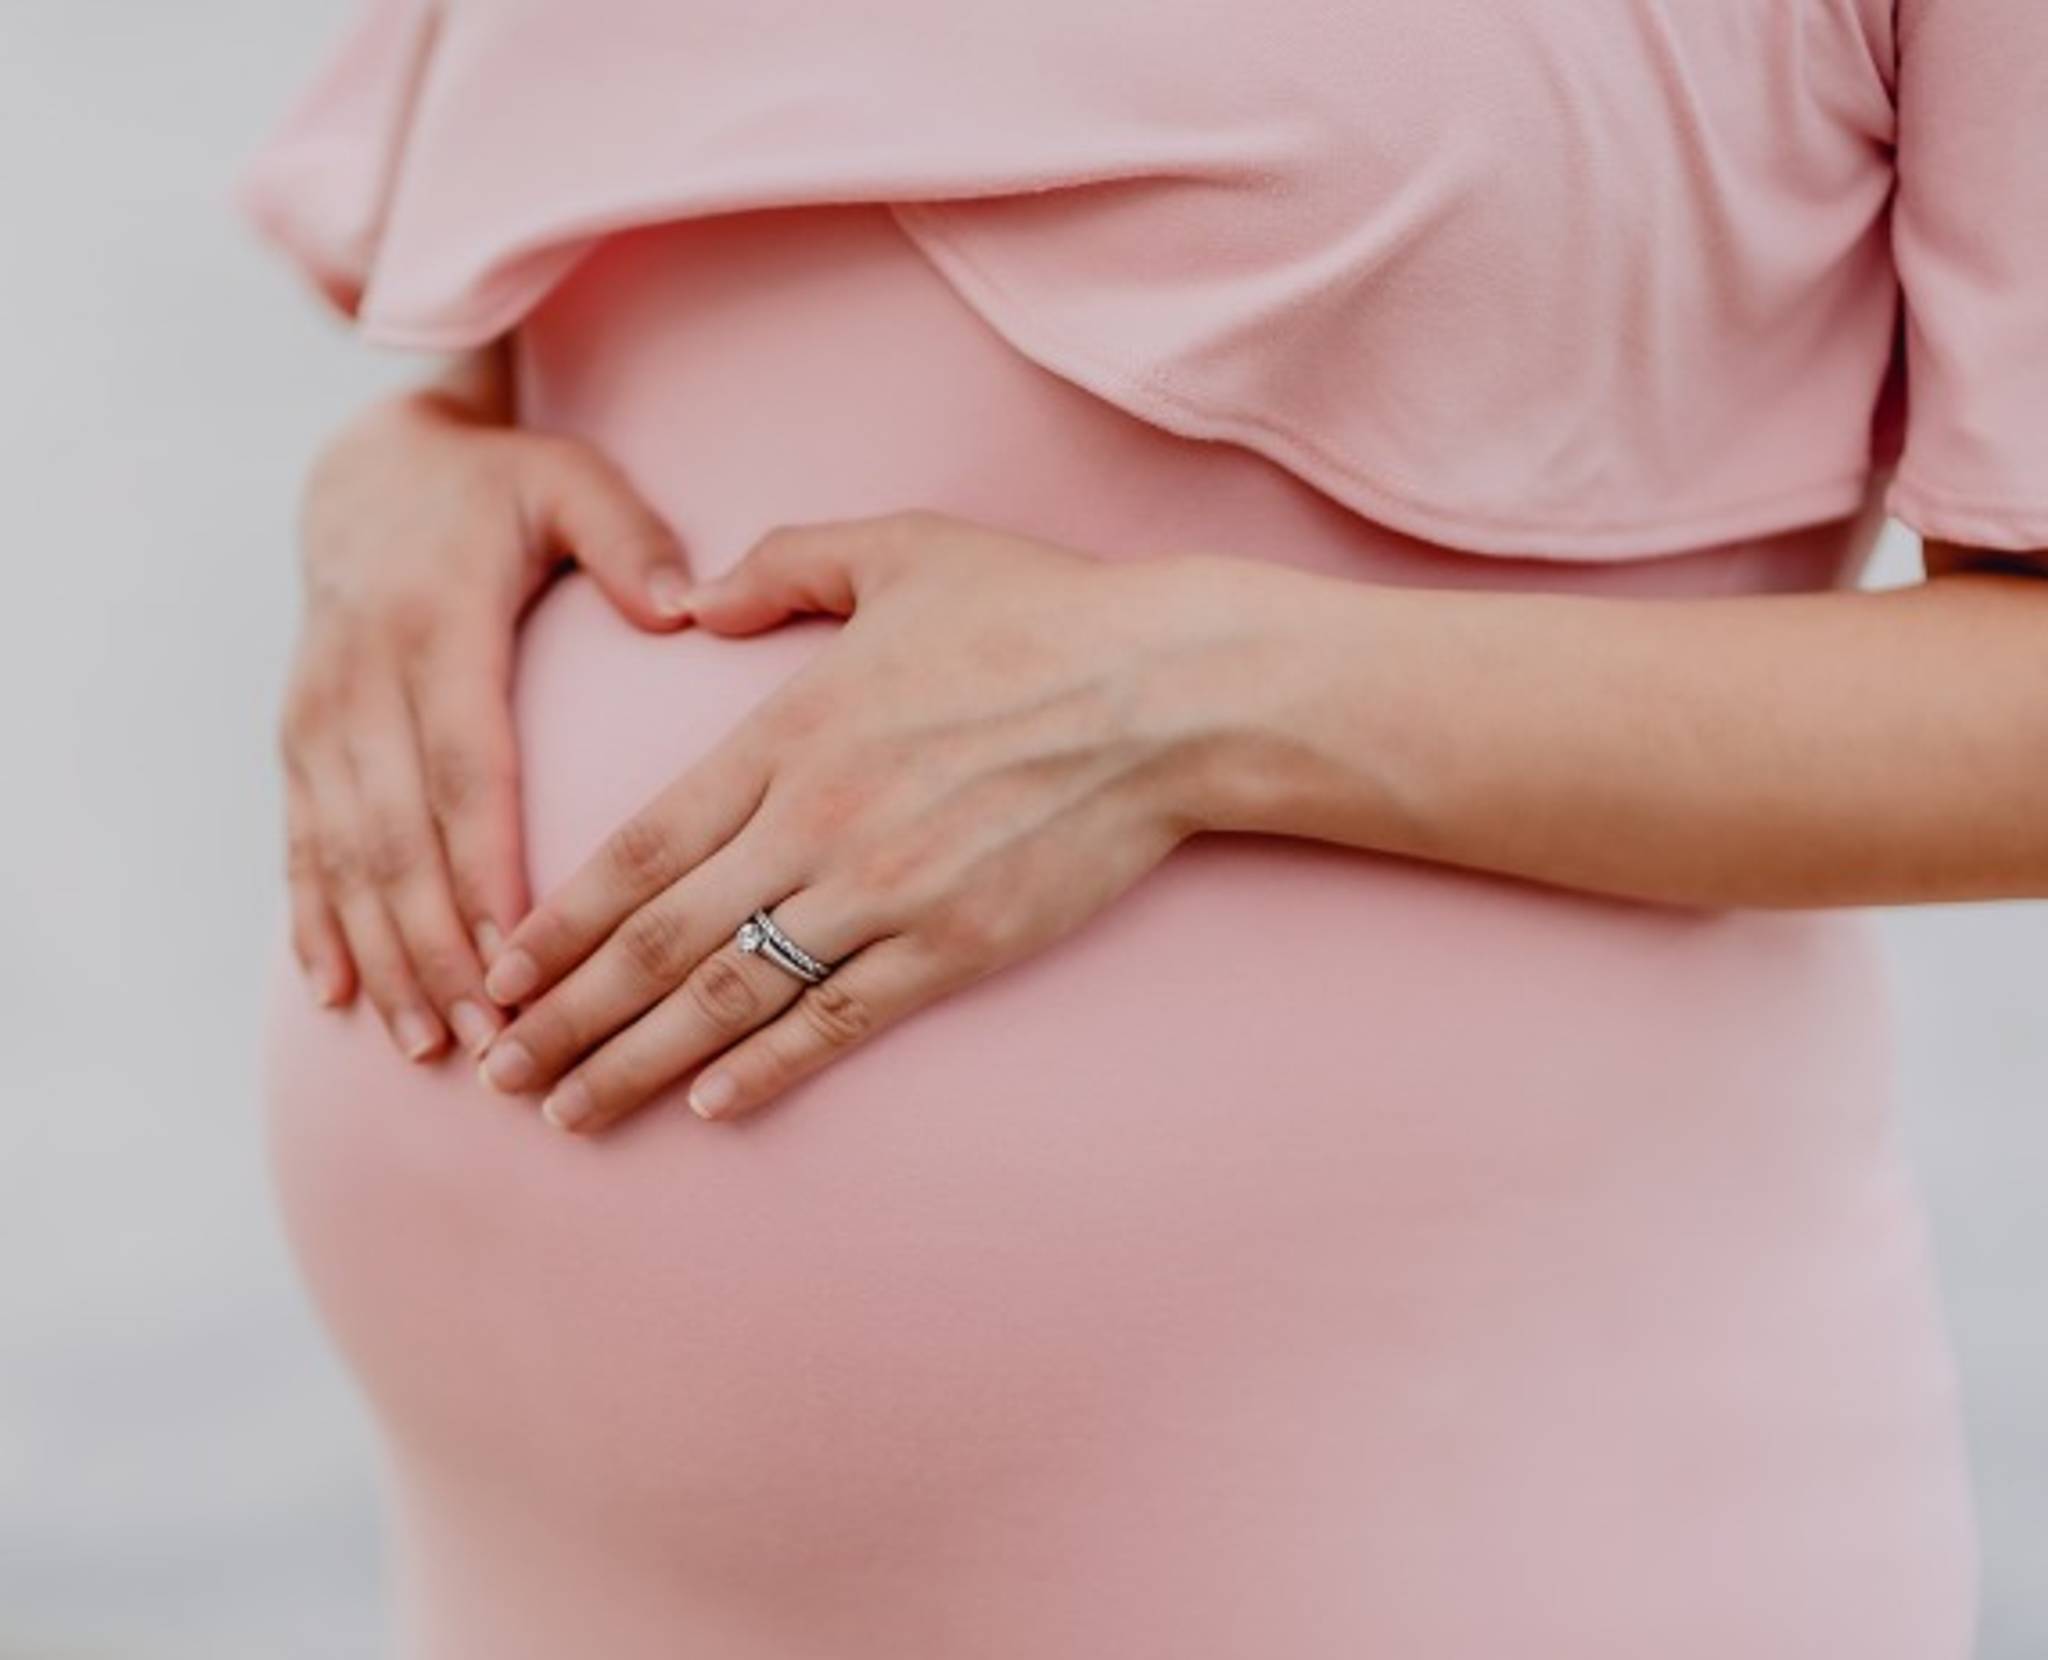 Maternity market booms amid desire for style variety